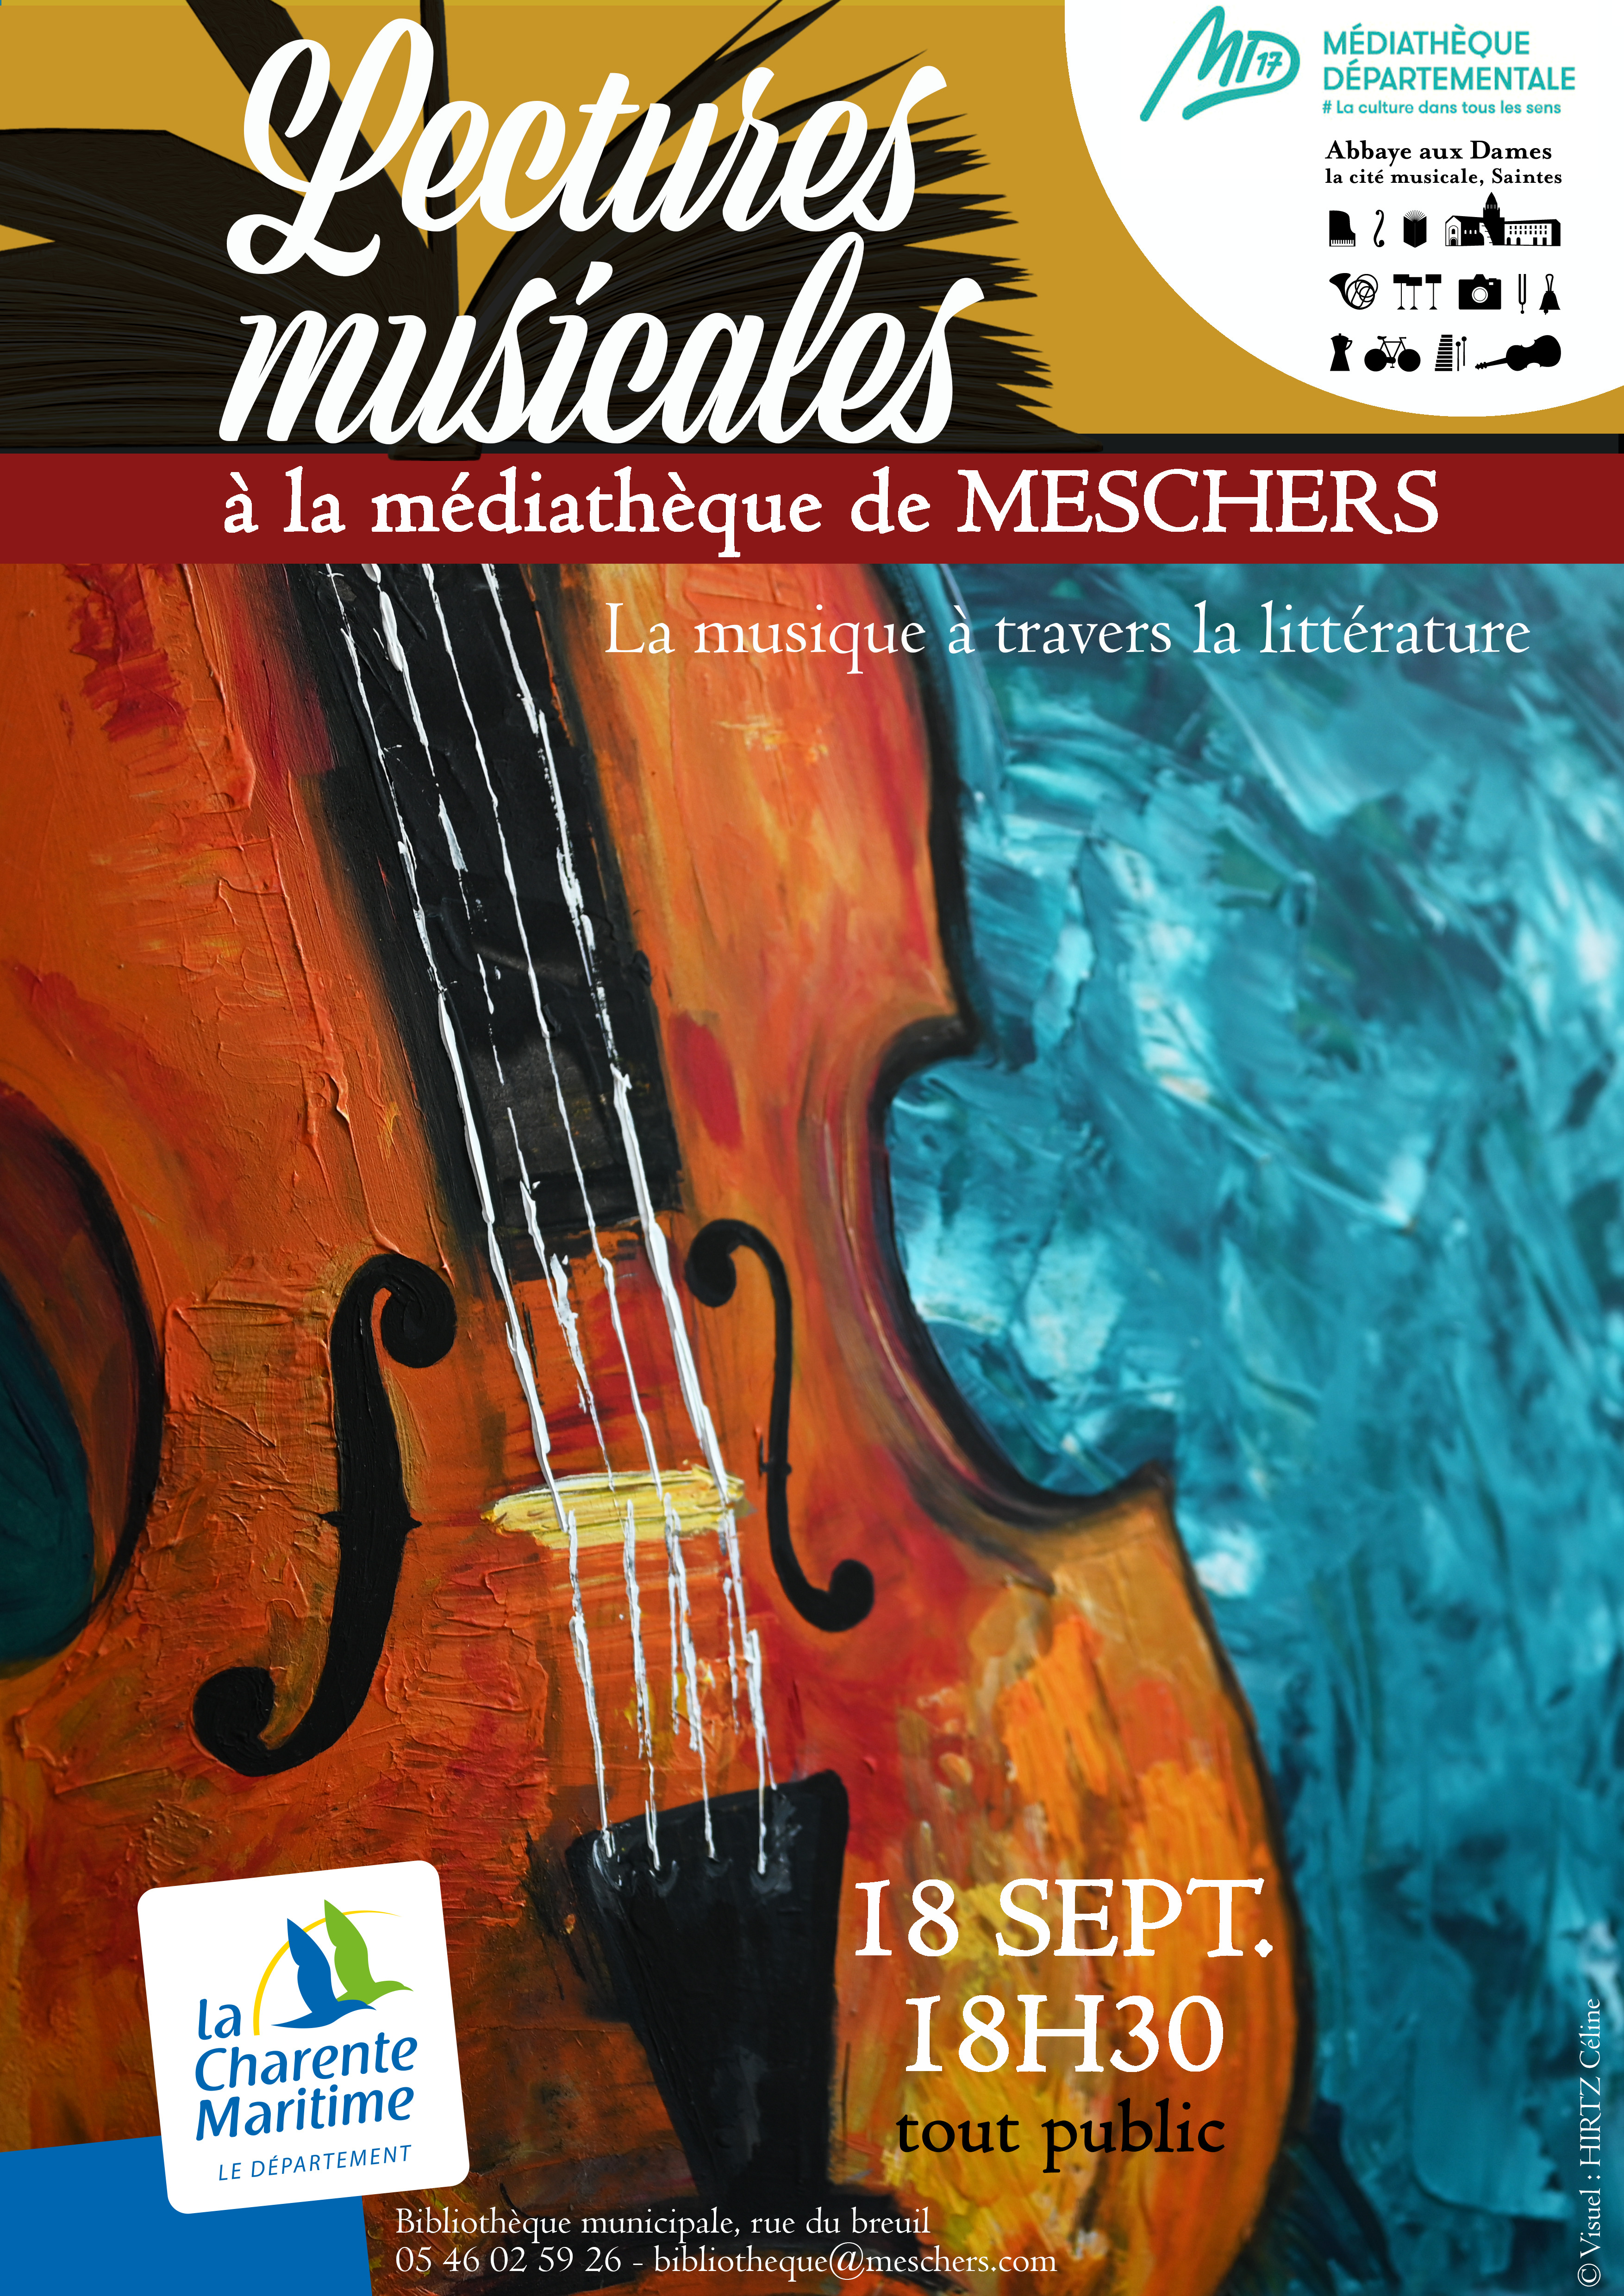 Affiche A3 Lectures musicales2019 MESCHERS v2